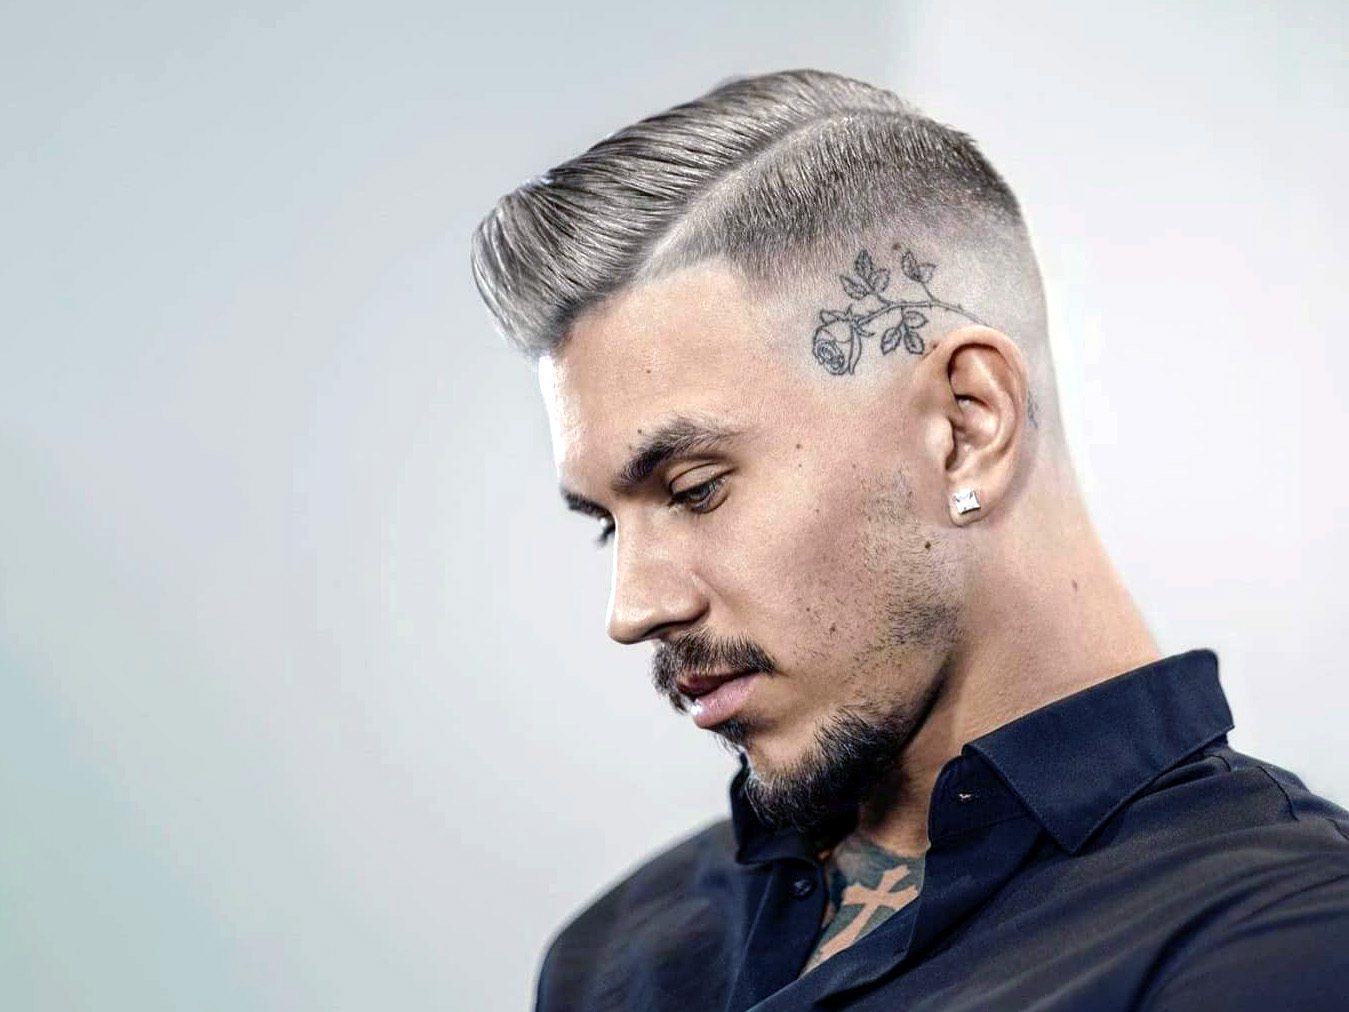 Trending 30 Haircuts for Men for 2022 | Haircut Inspiration